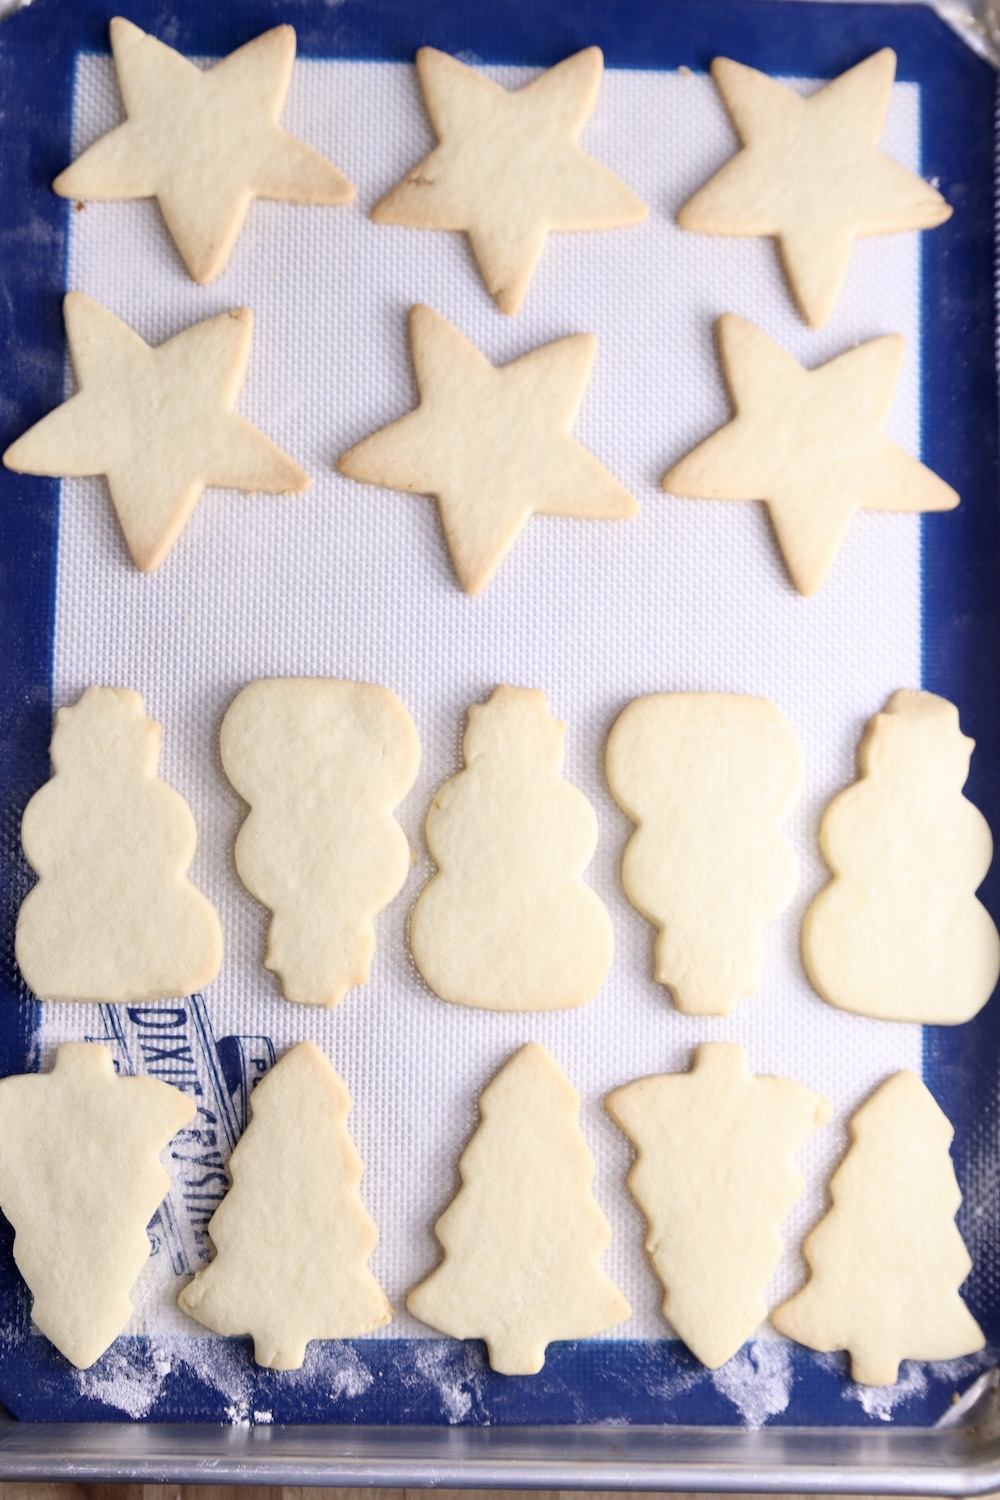 Baked Cut out sugar cookies on a baking sheet. Stars, snowmen and trees.